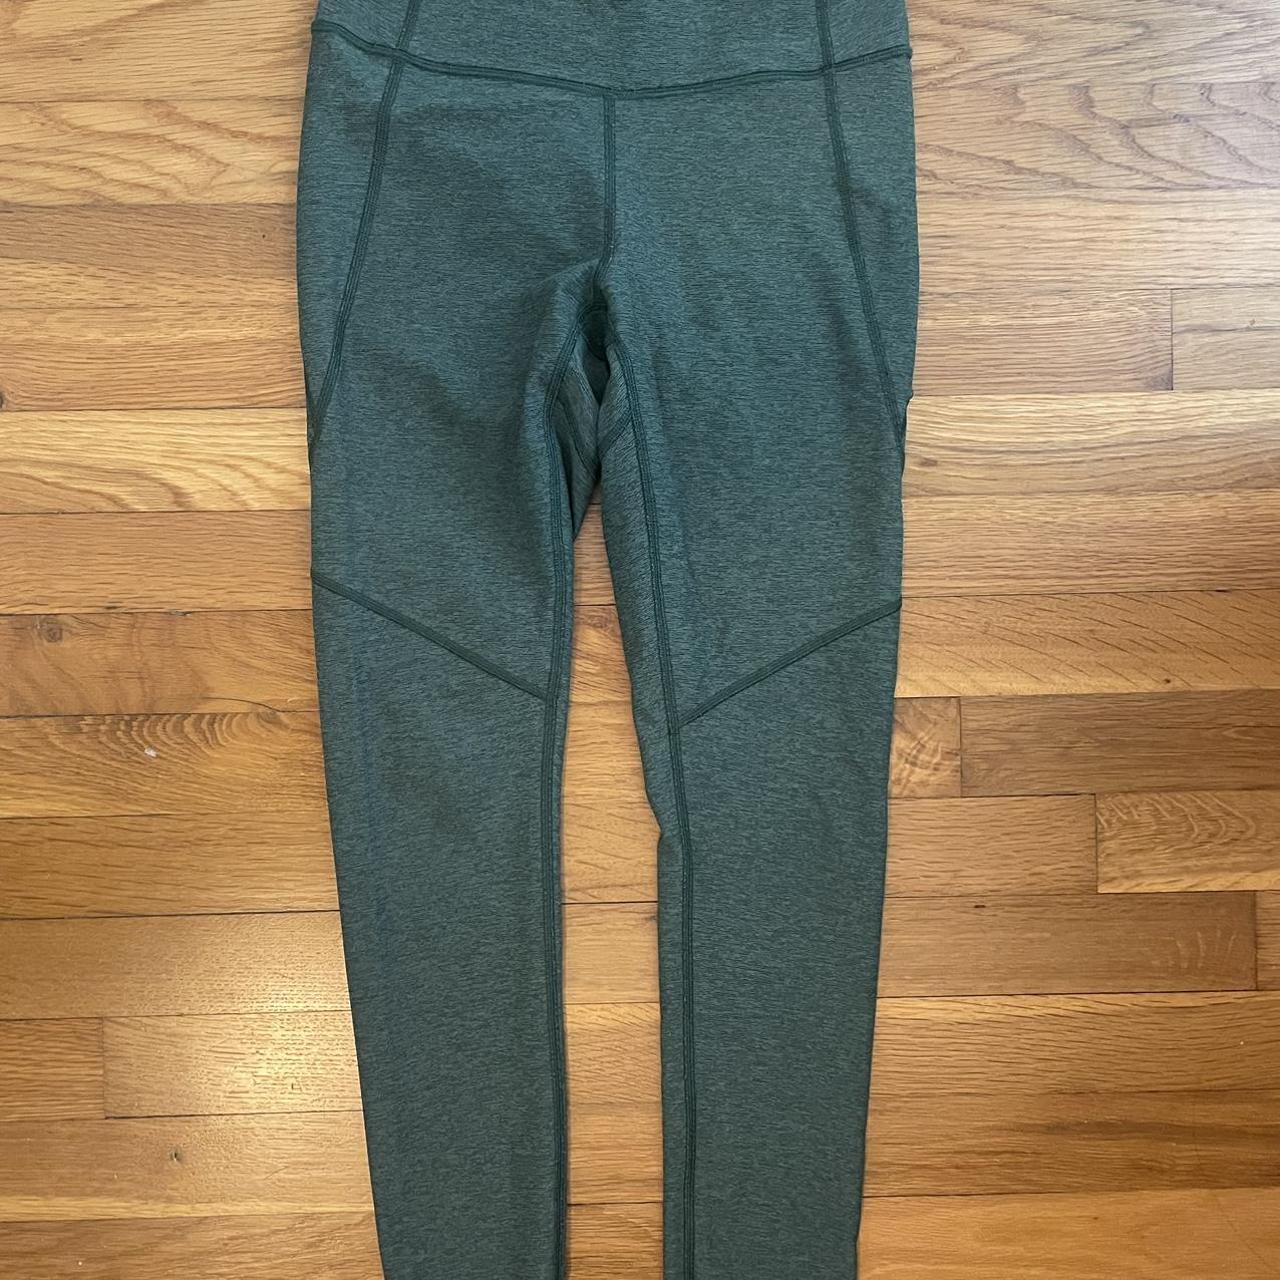 Outdoor Voices TechSweat 7/8 Leggings, size